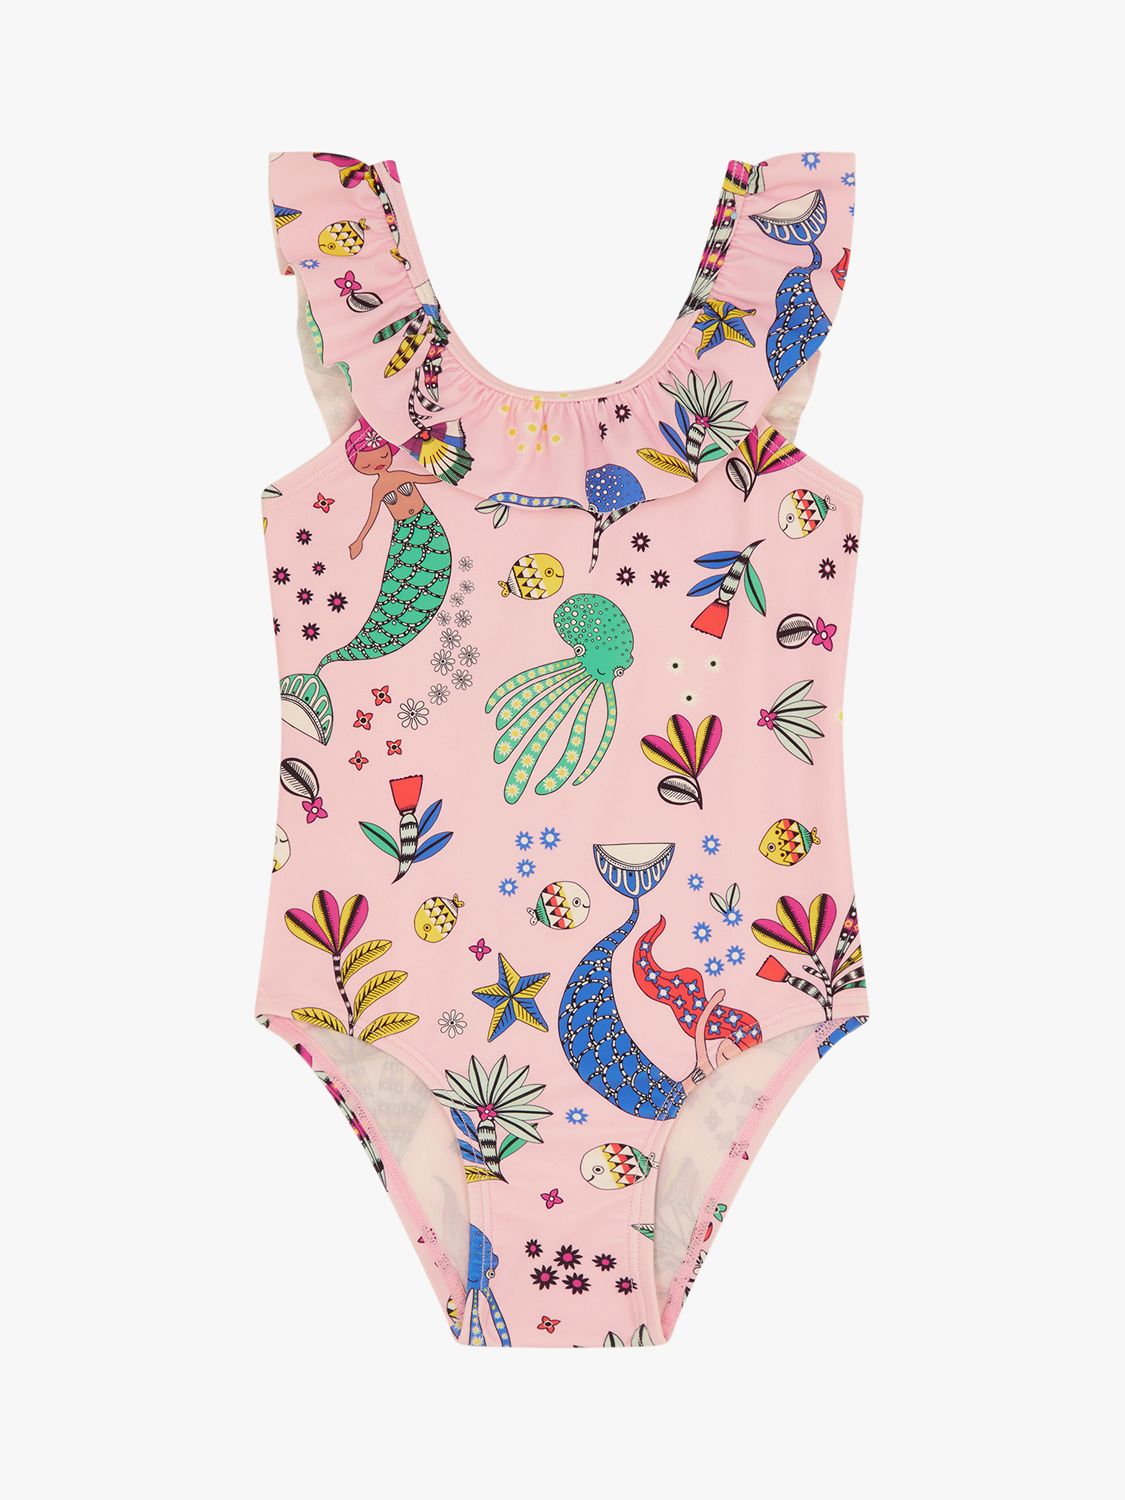 Angels by Accessorize Kids' Mermaid Print Frill Swimsuit, Pink/Multi at ...